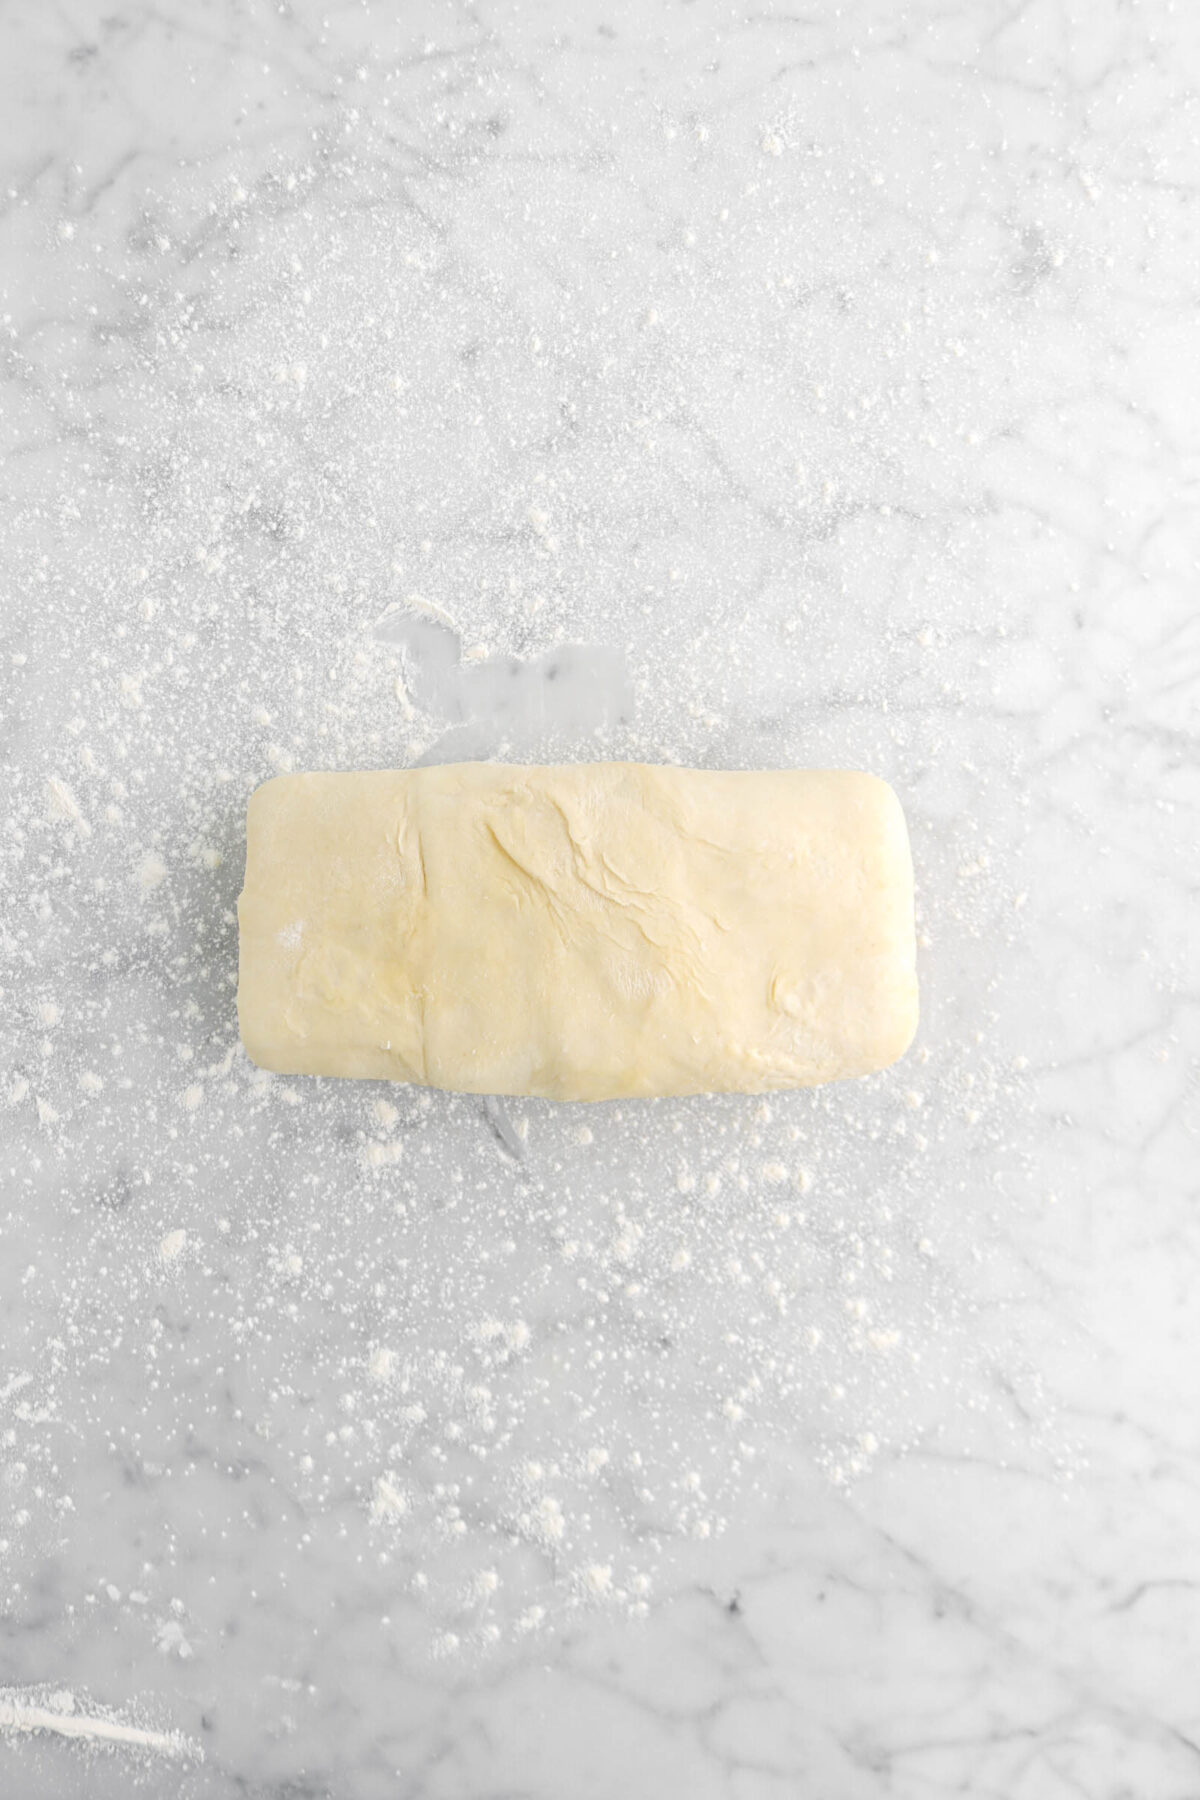 smooth pastry dough on floured surface